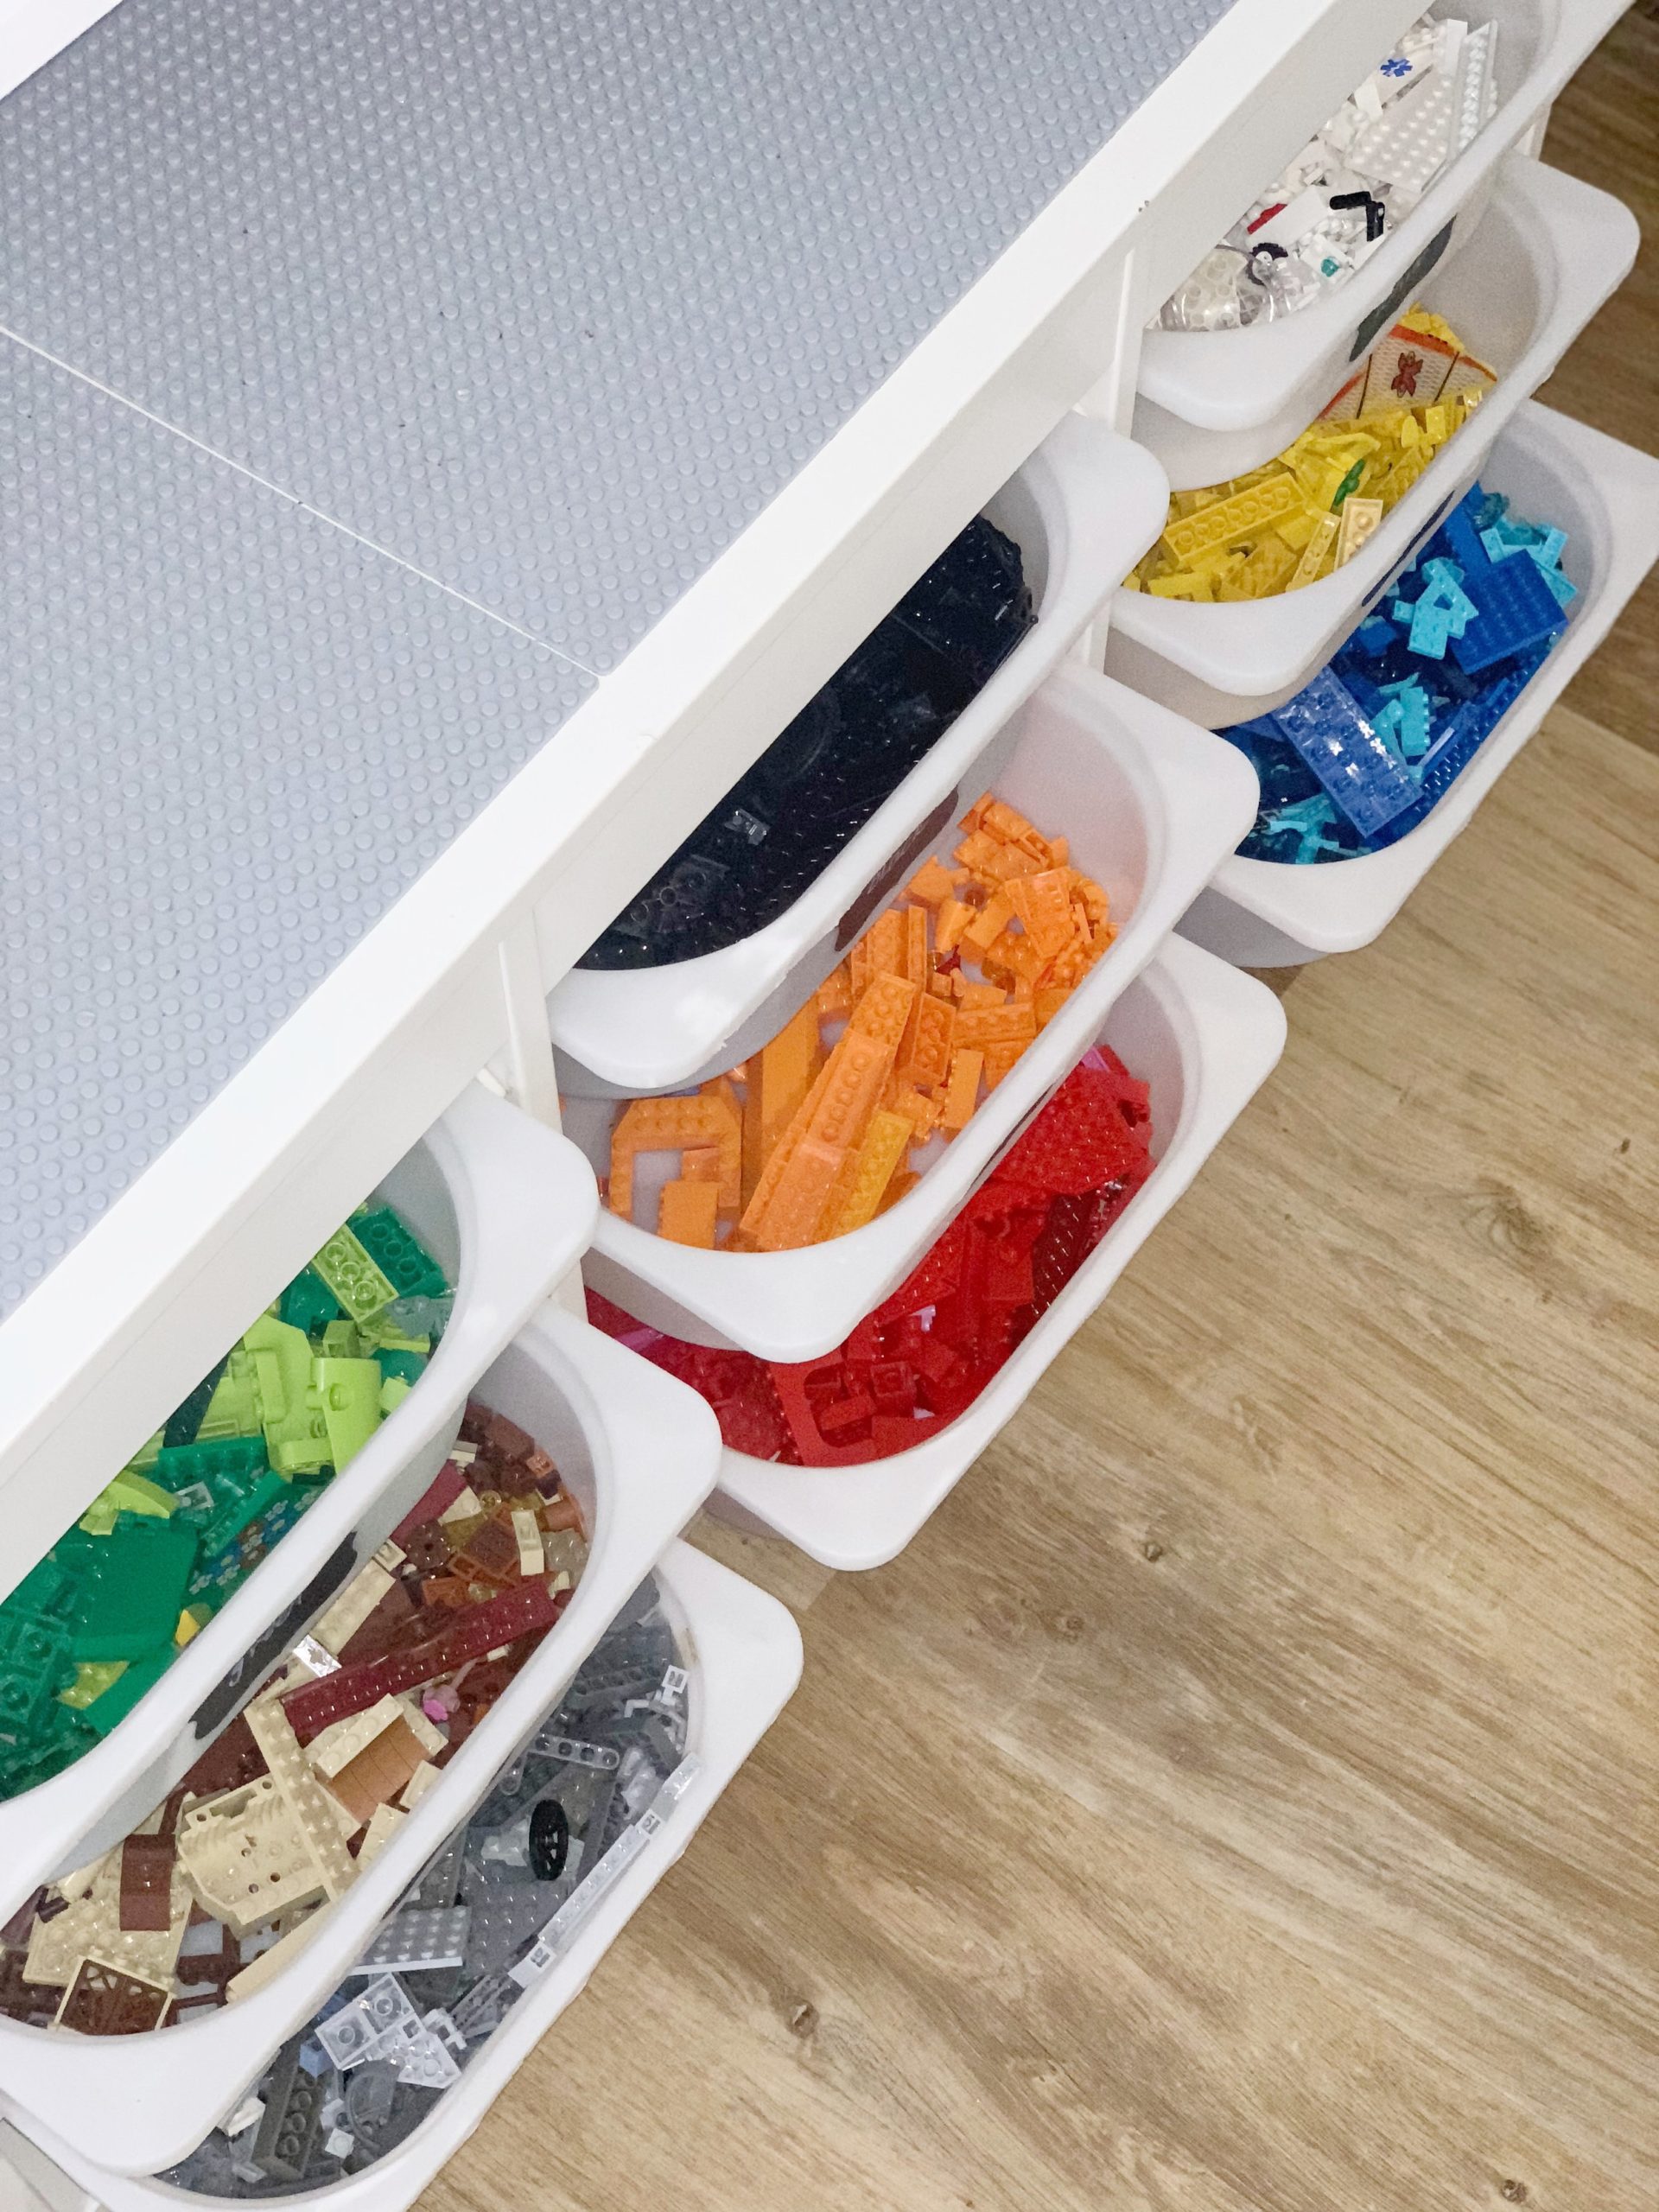 How to store and organize 9000+ LEGO bricks - IKEA Hackers